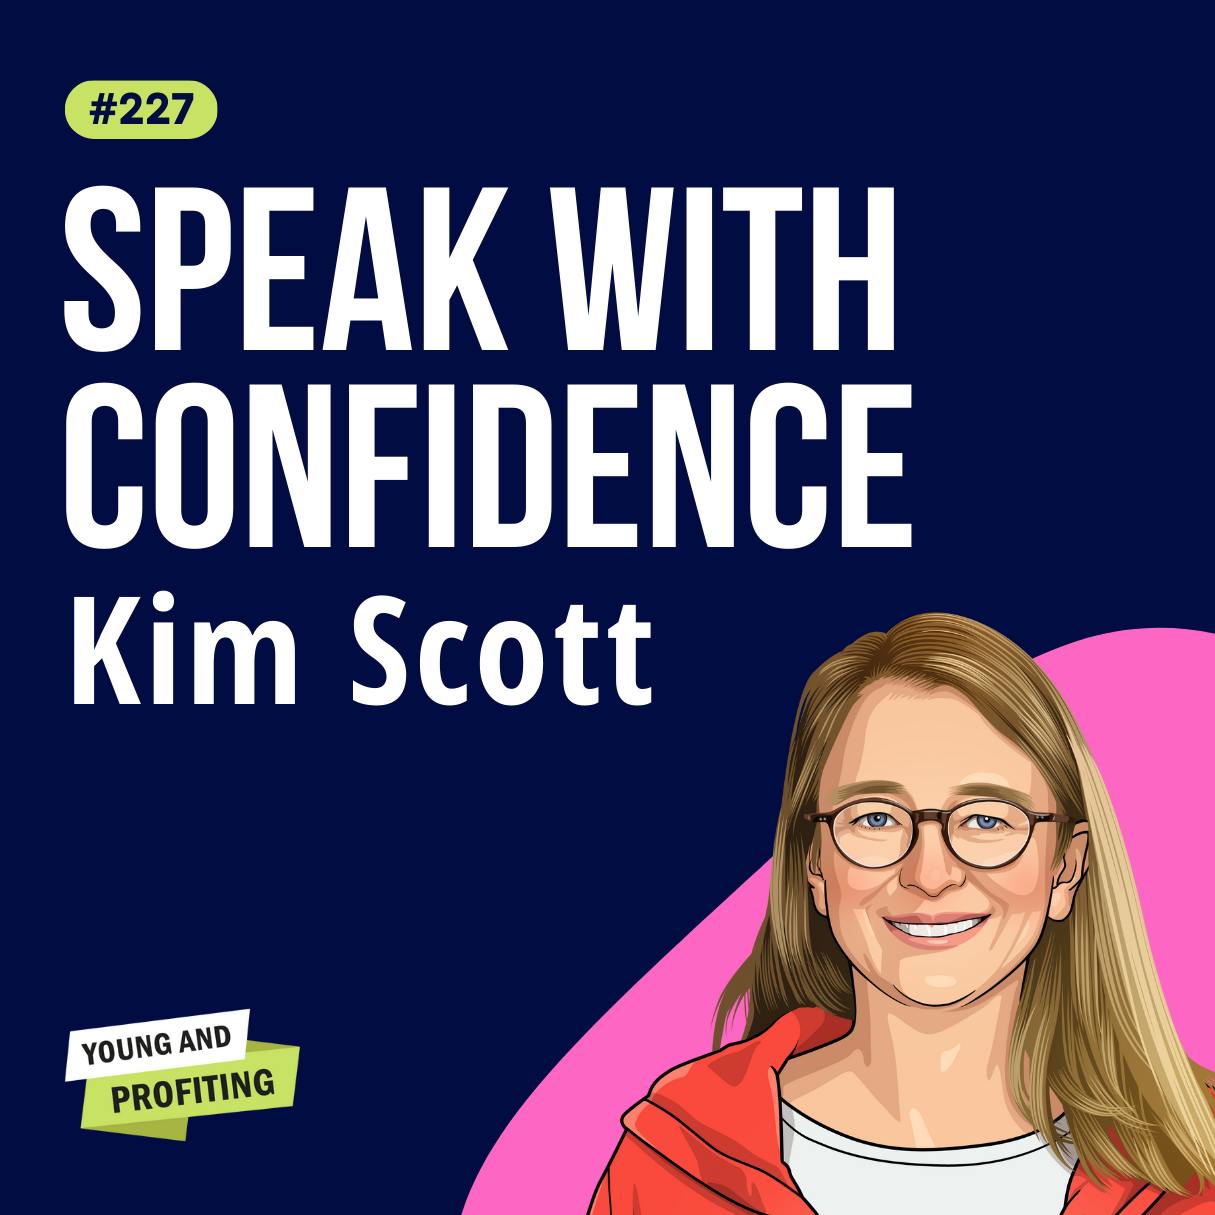 Kim Scott: Radical Candor, How to Say What You Mean Without Being A Jerk | E227